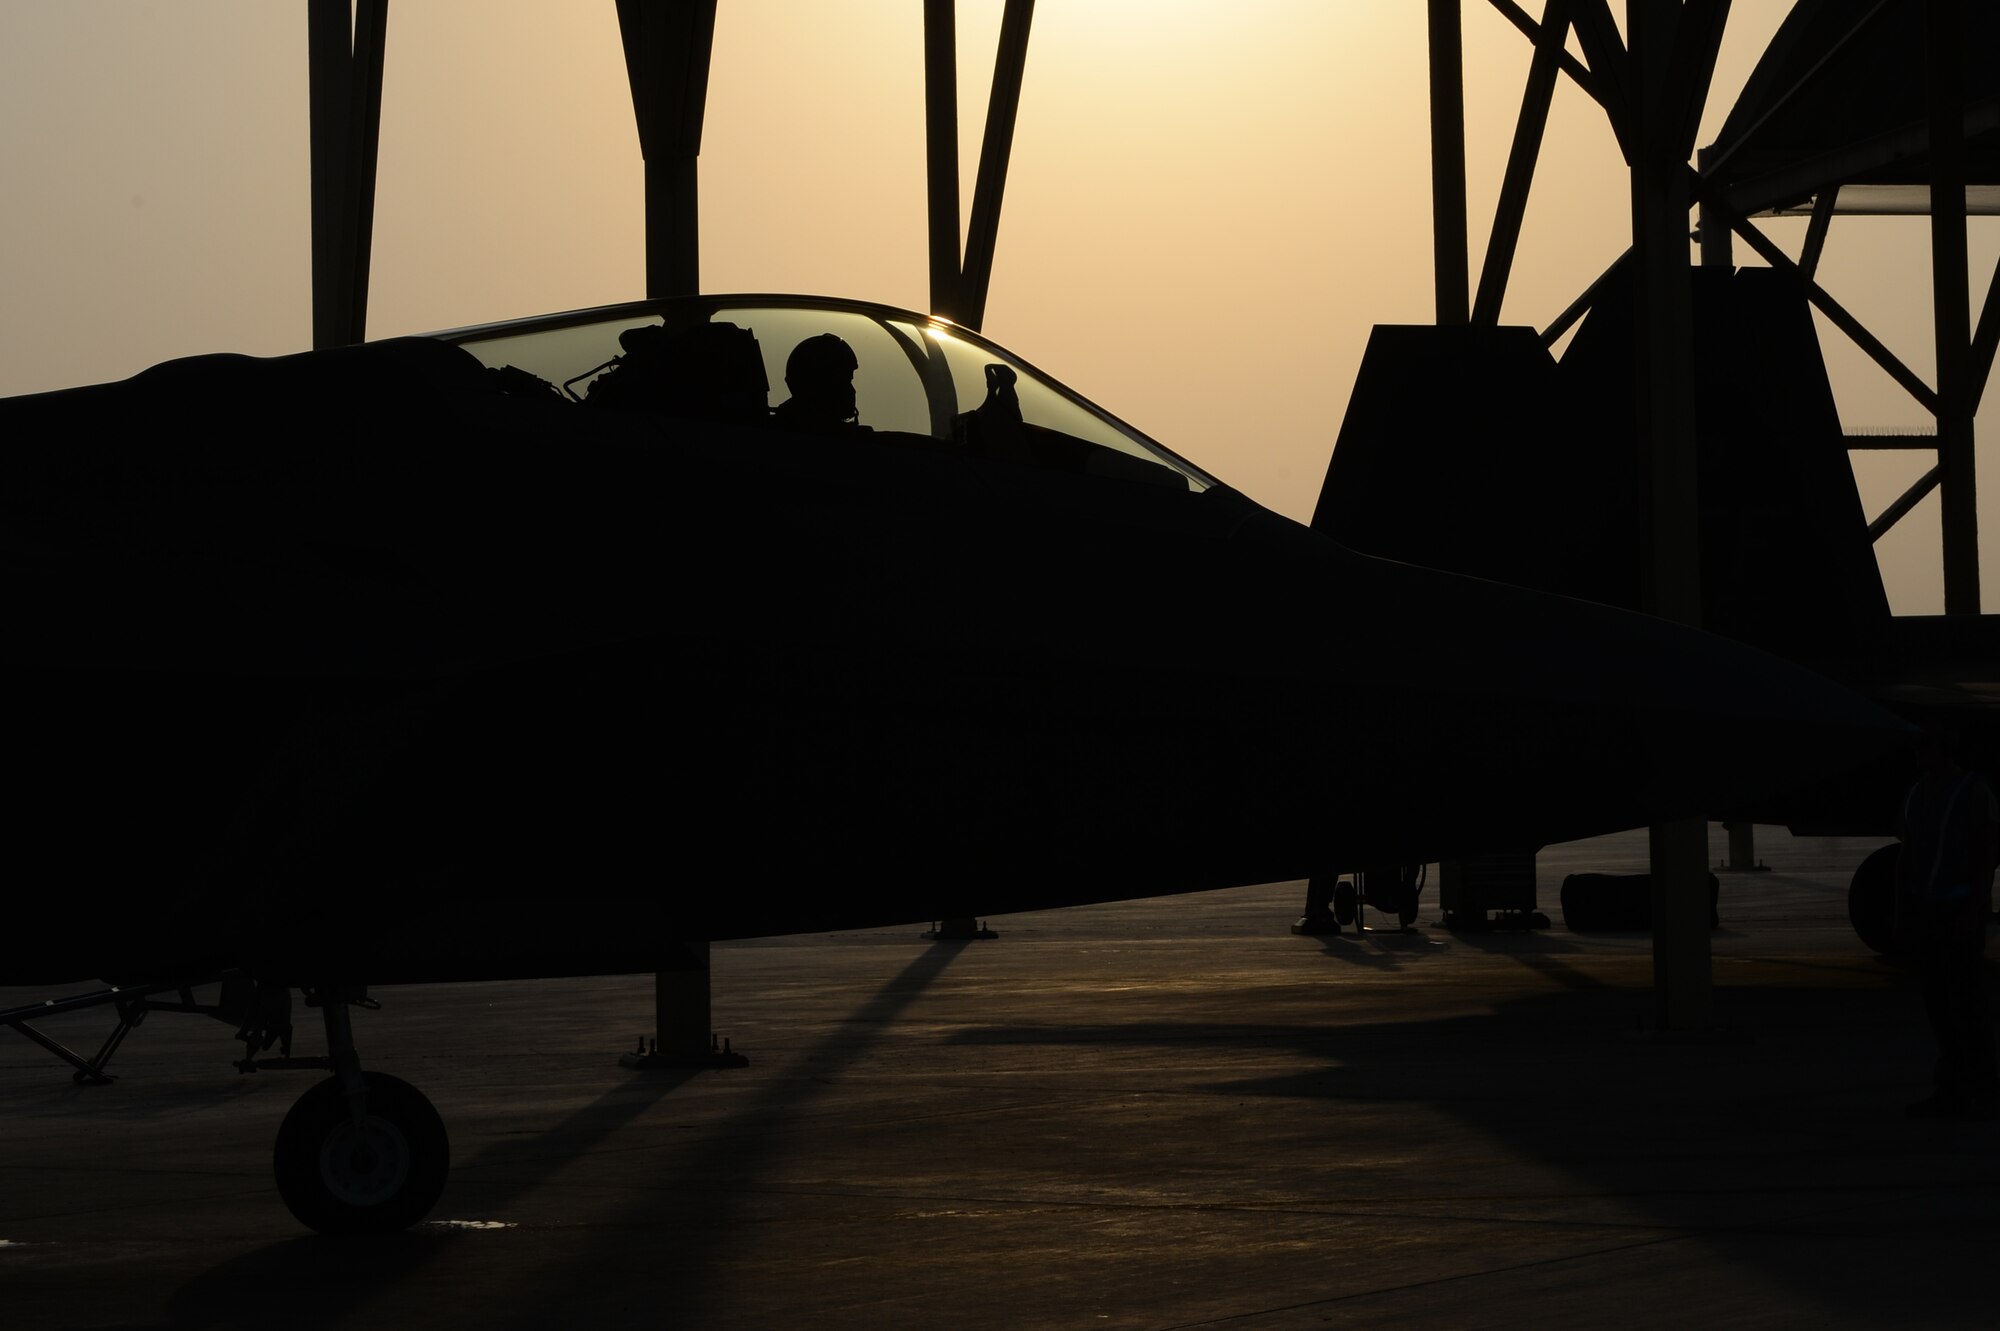 F-22 Raptors prepare to taxi at an undisclosed location in Southwest Asia, August 30, 2015. The F-22’s combination of sensor capability, integrated avionics, situational awareness, and weapons provides first-kill opportunity against threats. (U.S. Air Force photo illustration/ Staff Sgt. Sandra Welch)